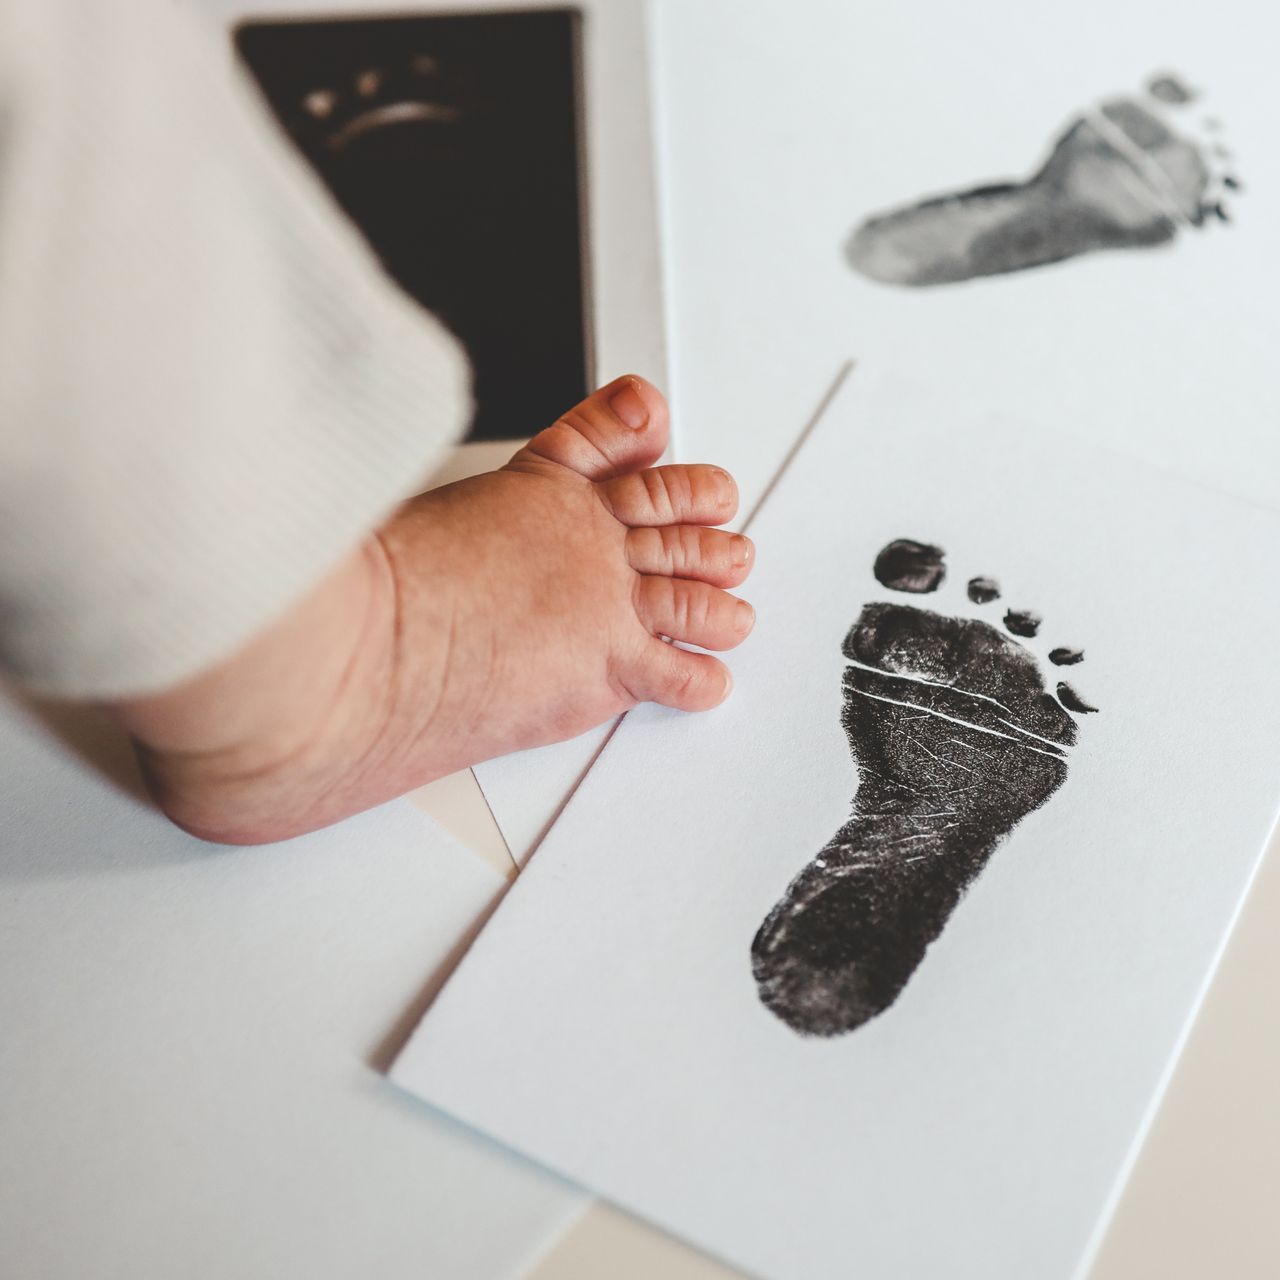 Image of child's foot and footprint on a piece of paper.